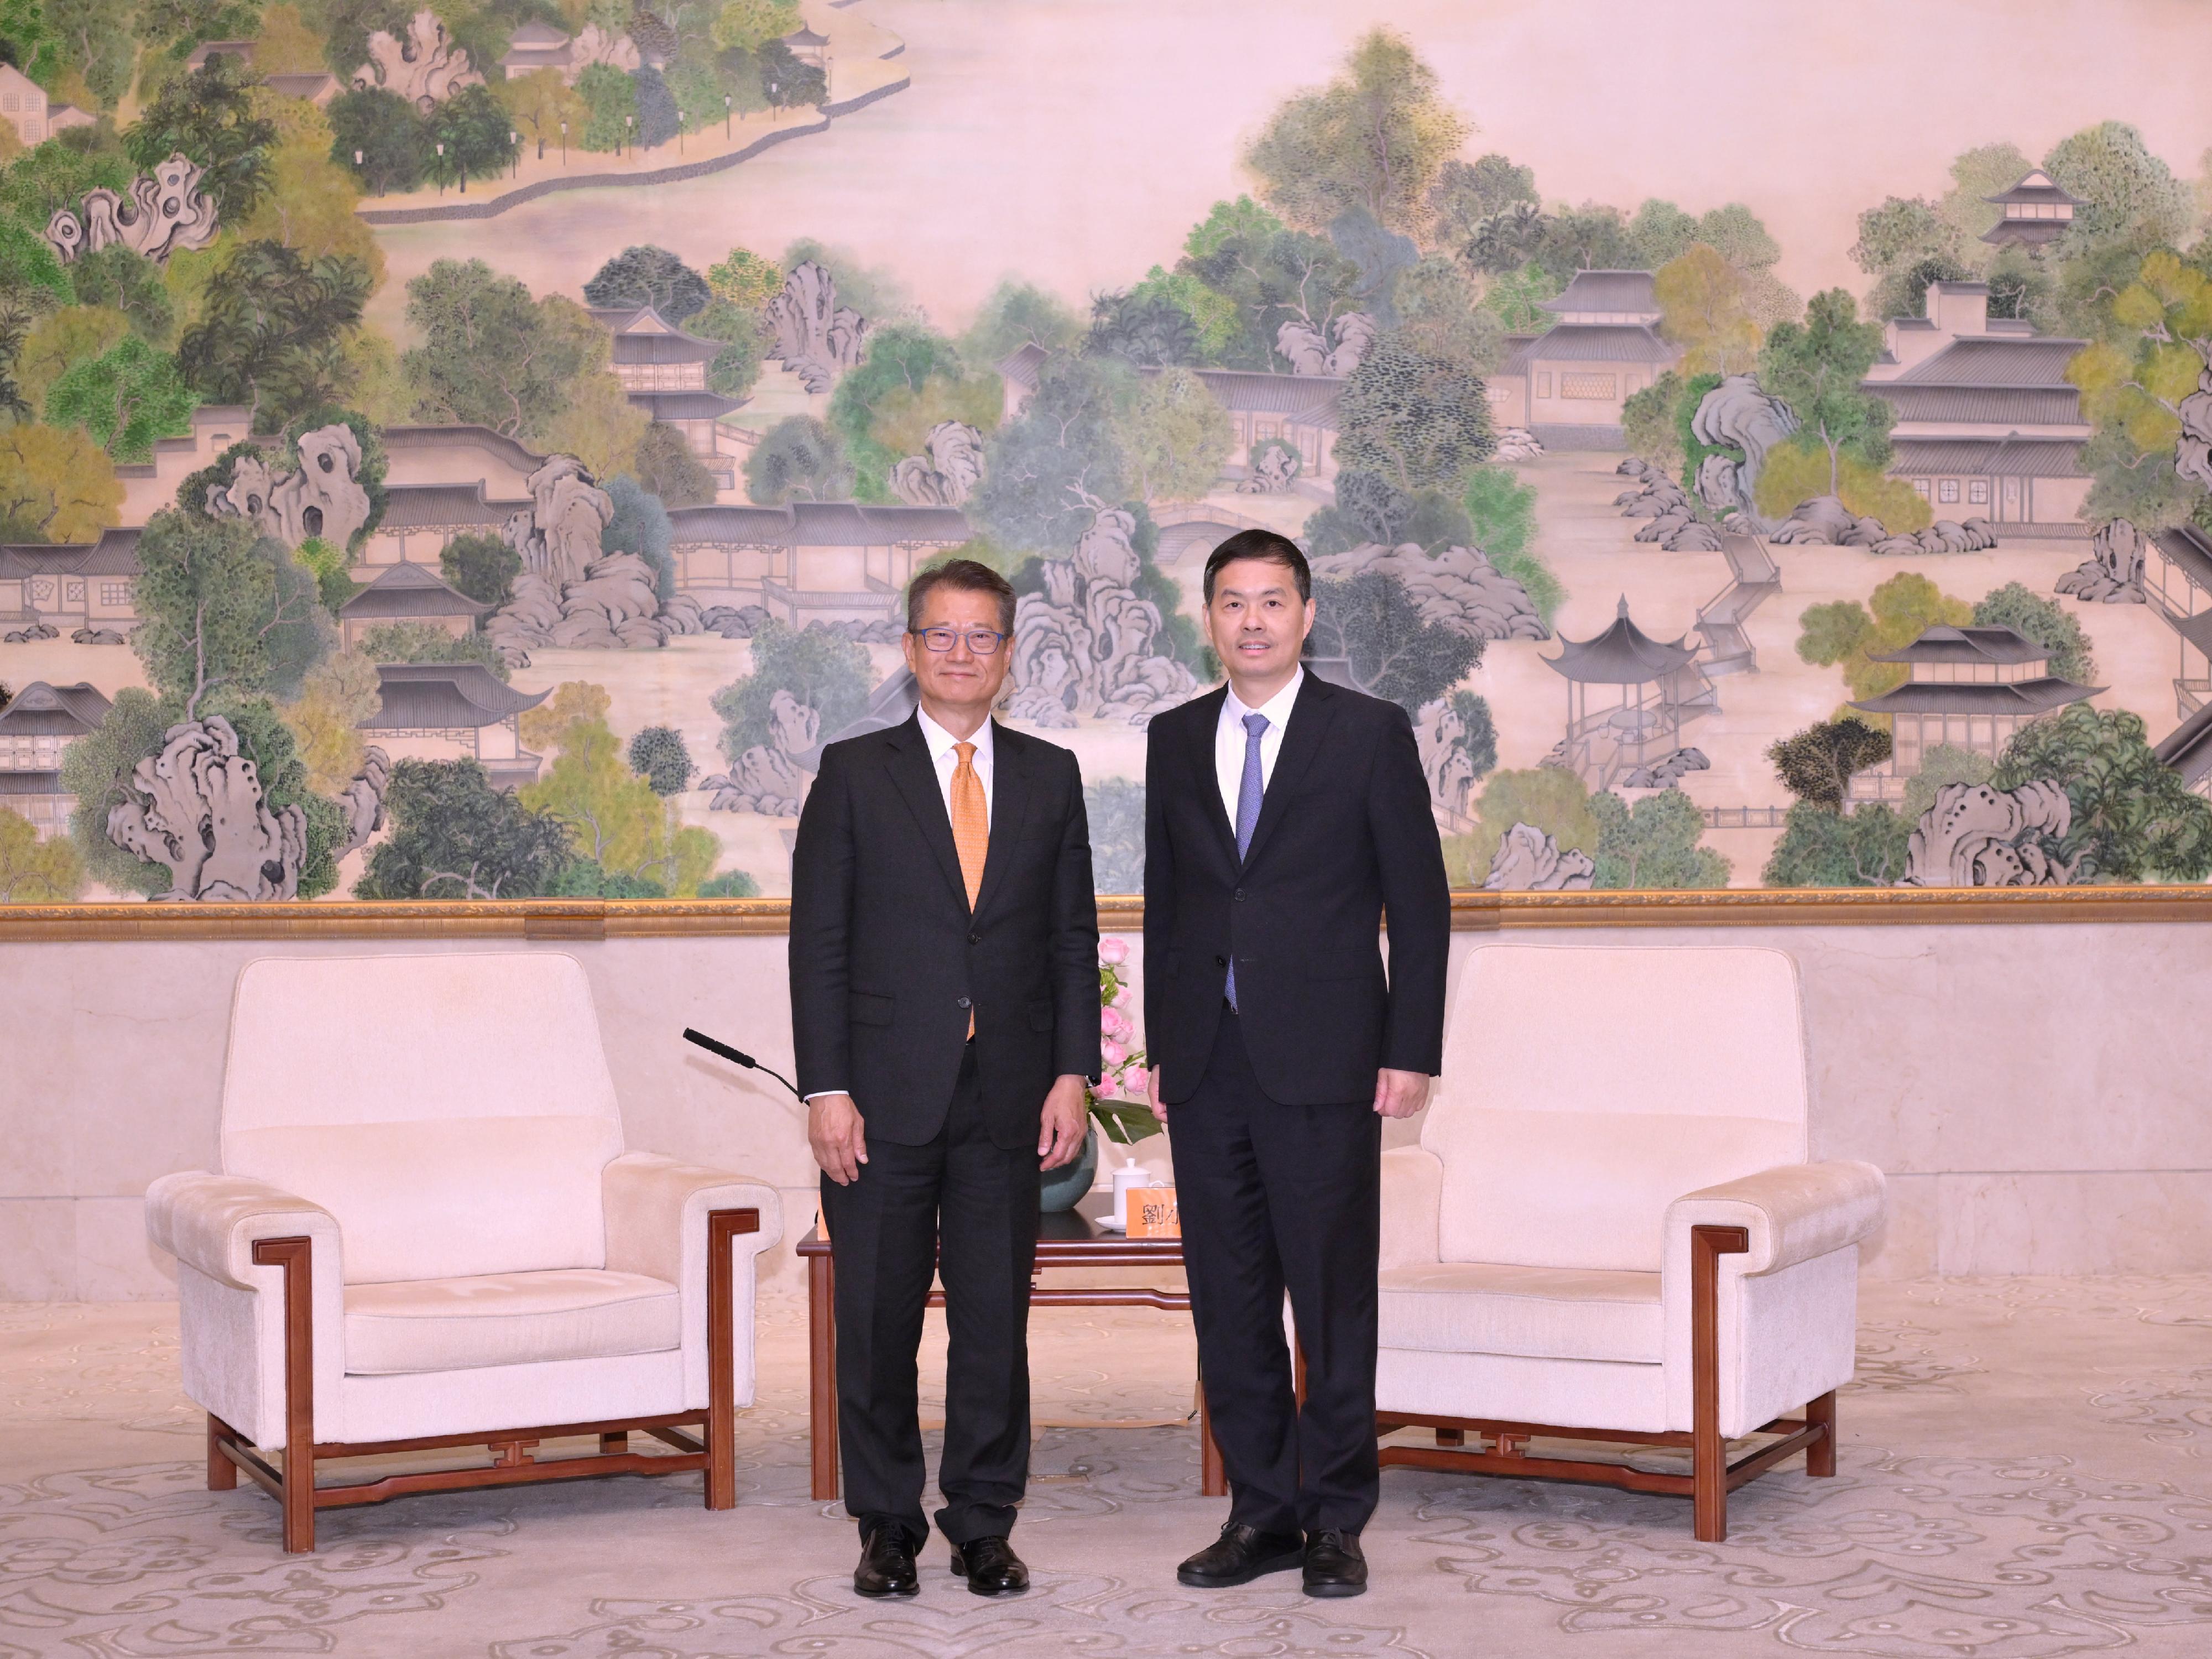 The Financial Secretary, Mr Paul Chan, continued his visit to Hangzhou this morning (April 18). Photo shows Mr Chan (left) meeting with the Secretary of the CPC Suzhou Municipal Committee, Mr Liu Xiaotao (right).

